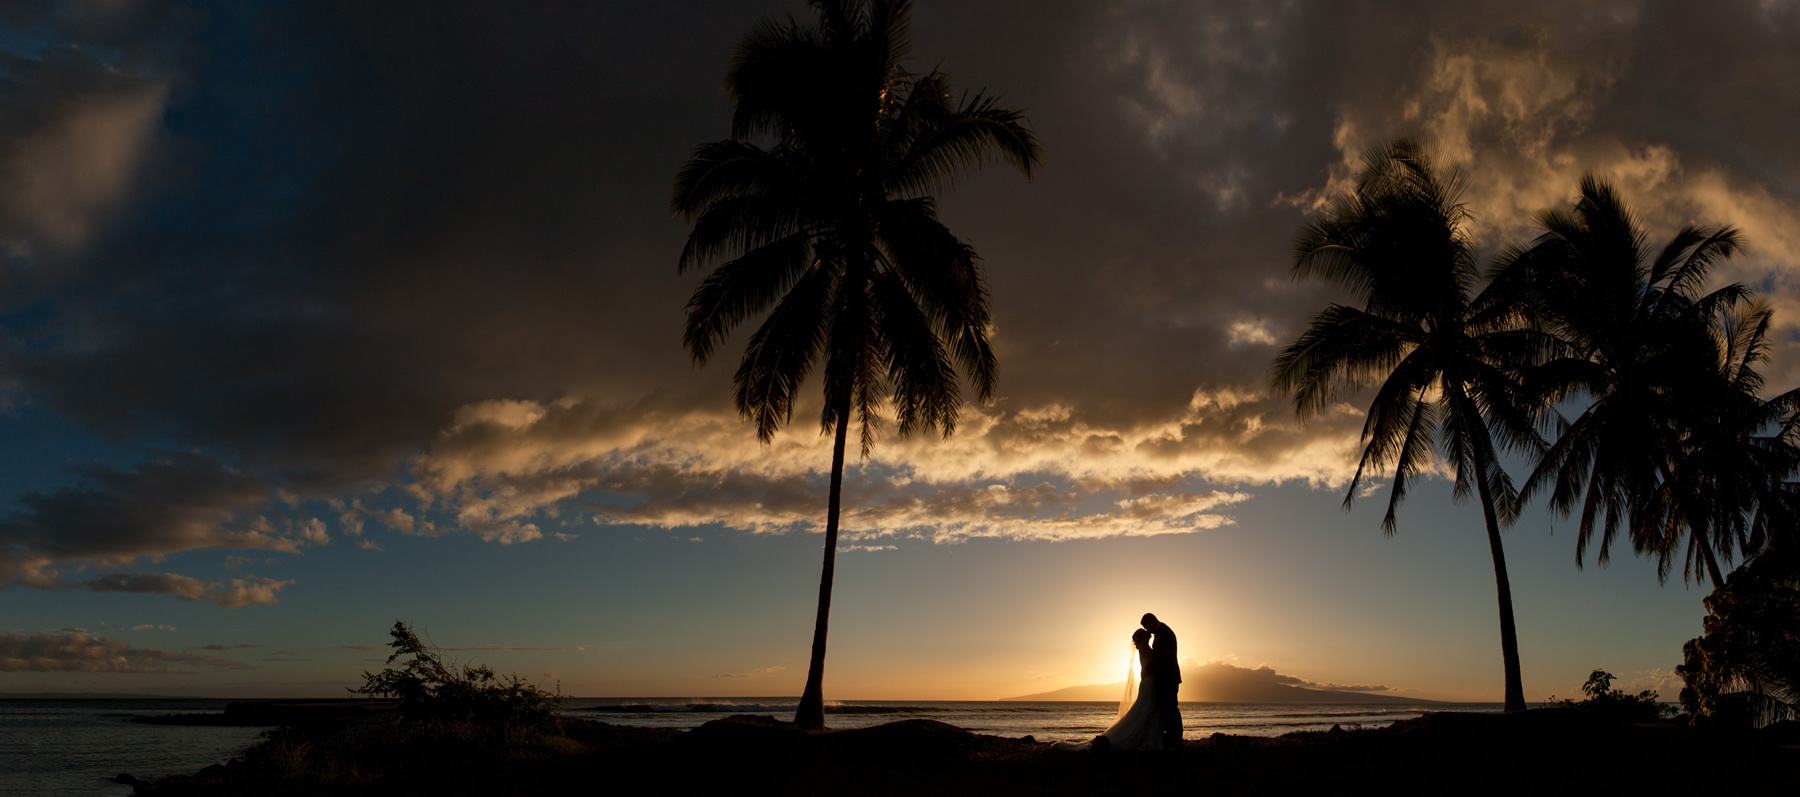 A couple silhouetted against a palm tree liined sunset in Maui.